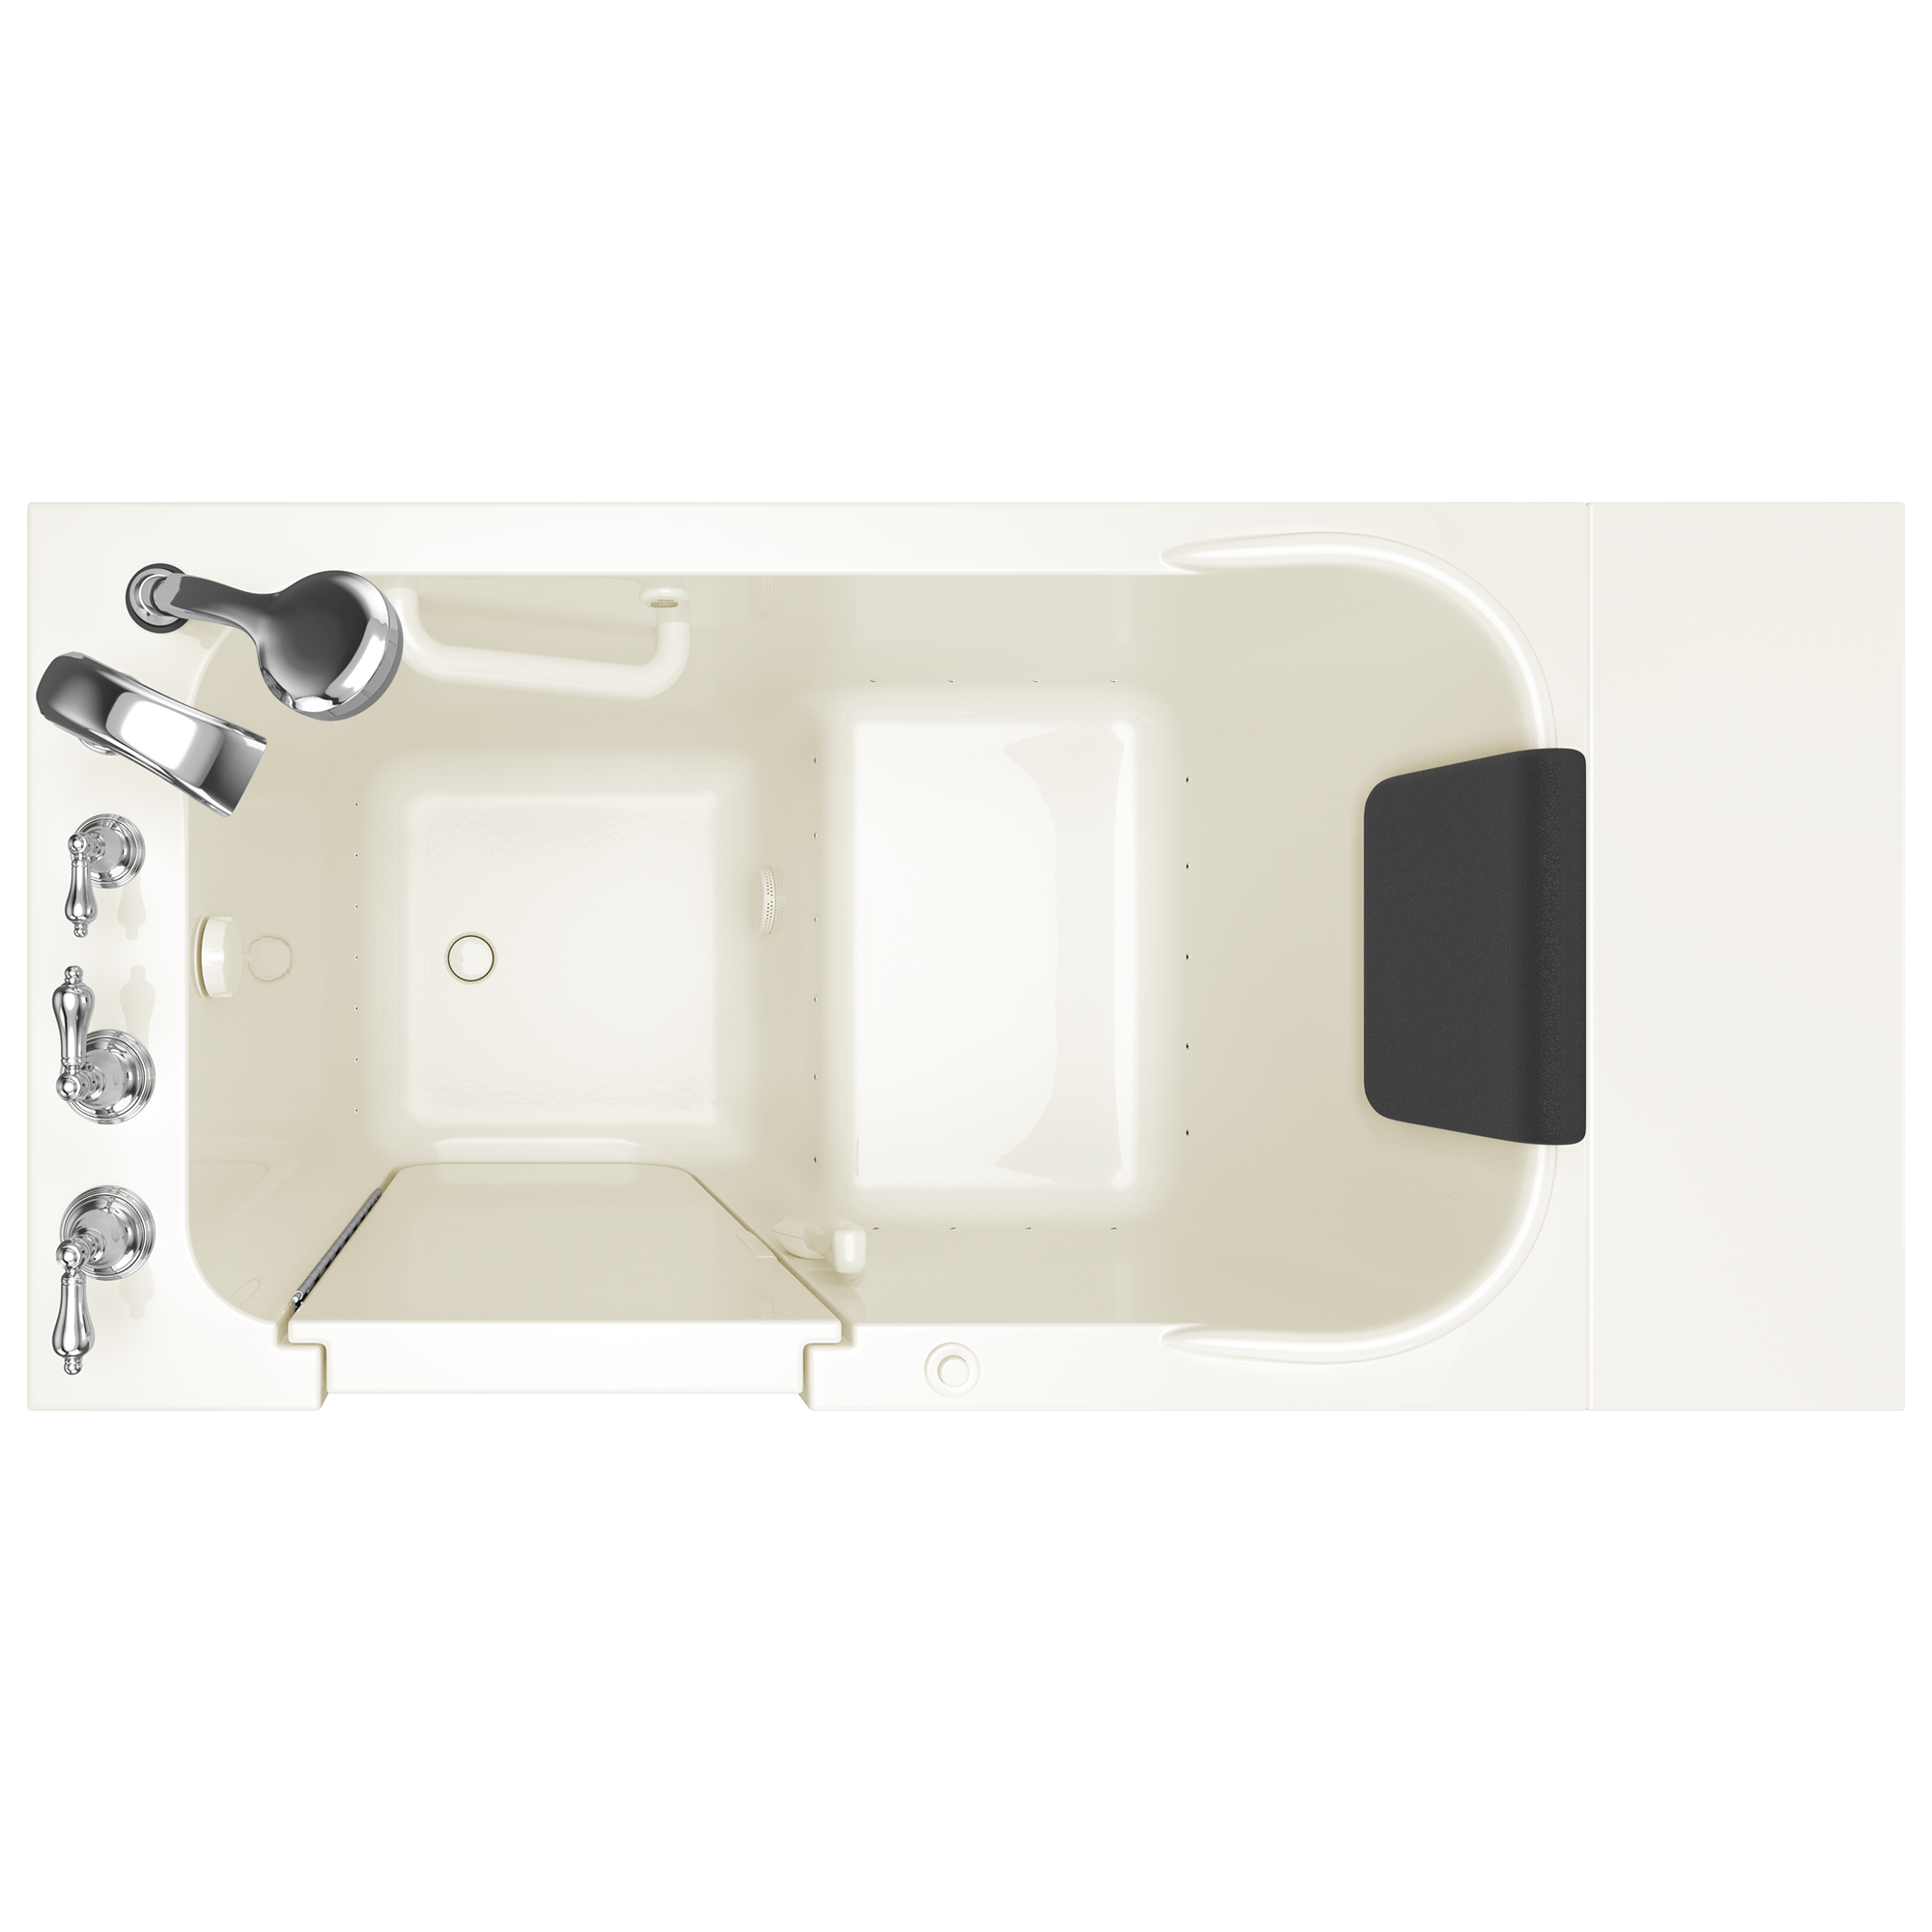 Gelcoat Premium Series 28 x 48 Inch Walk in Tub With Air Spa System   Left Hand Drain With Faucet WIB LINEN